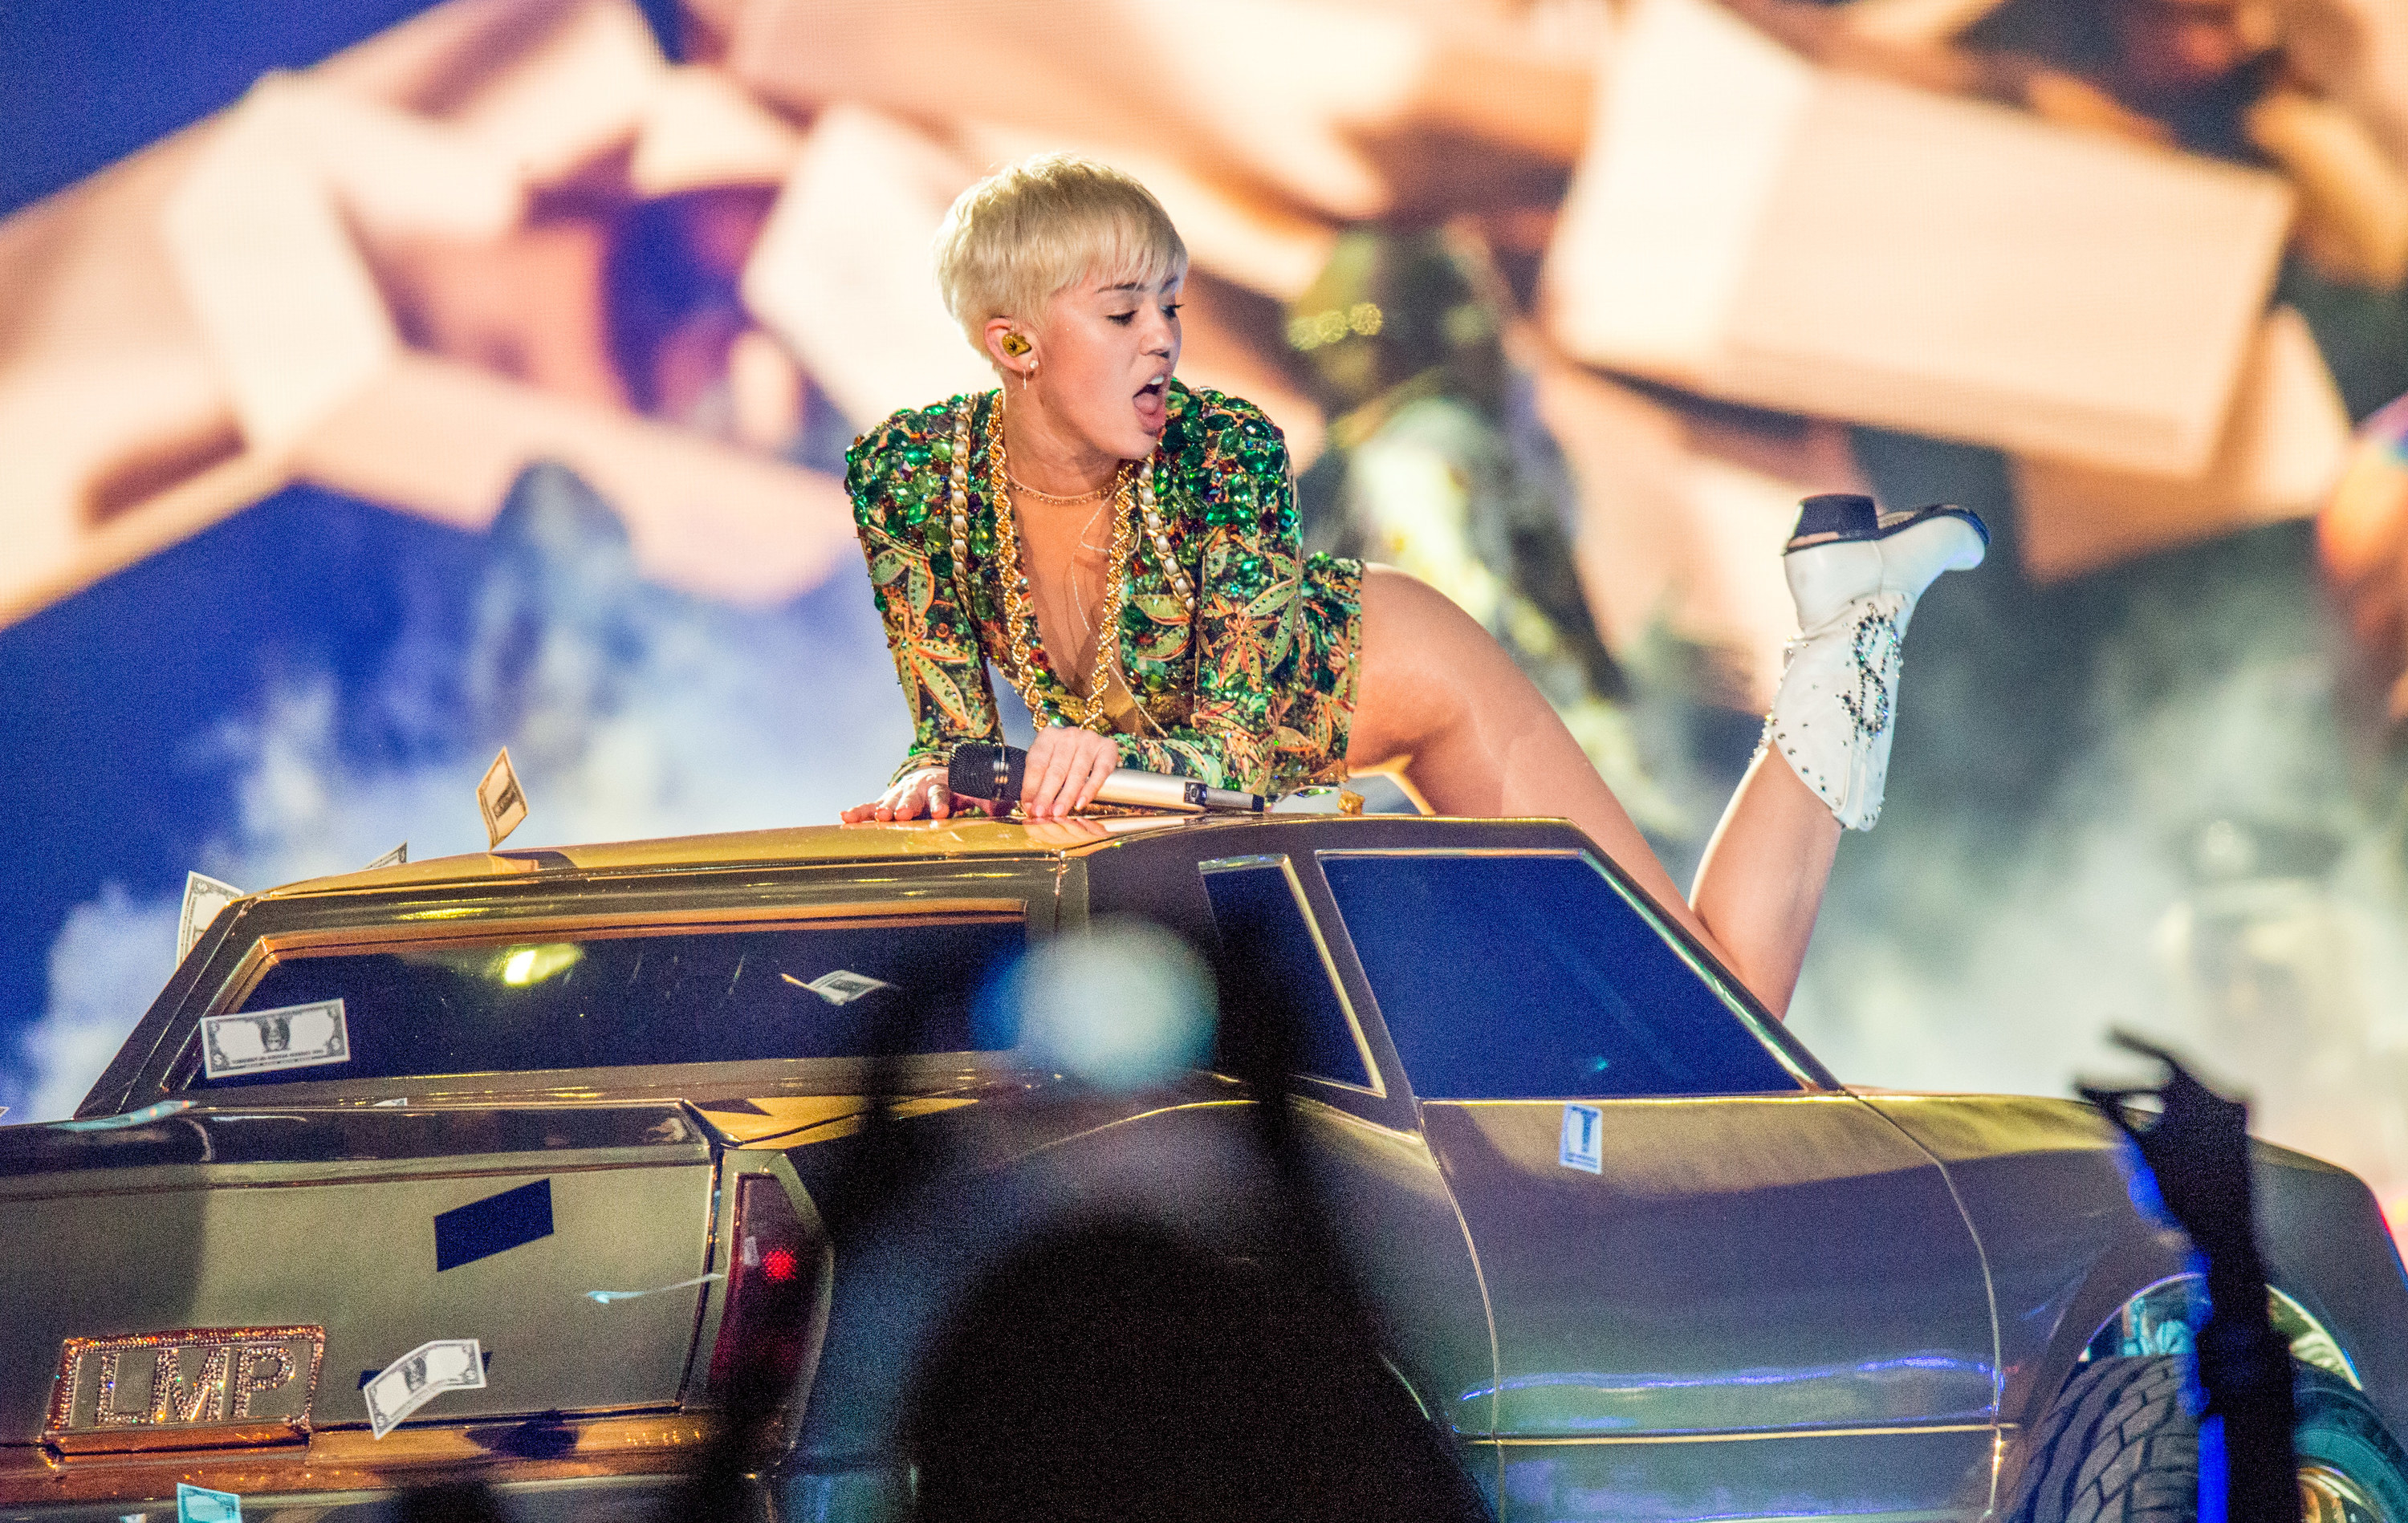 Miles Cyrus on top of a gold car on her Bangerz Tour